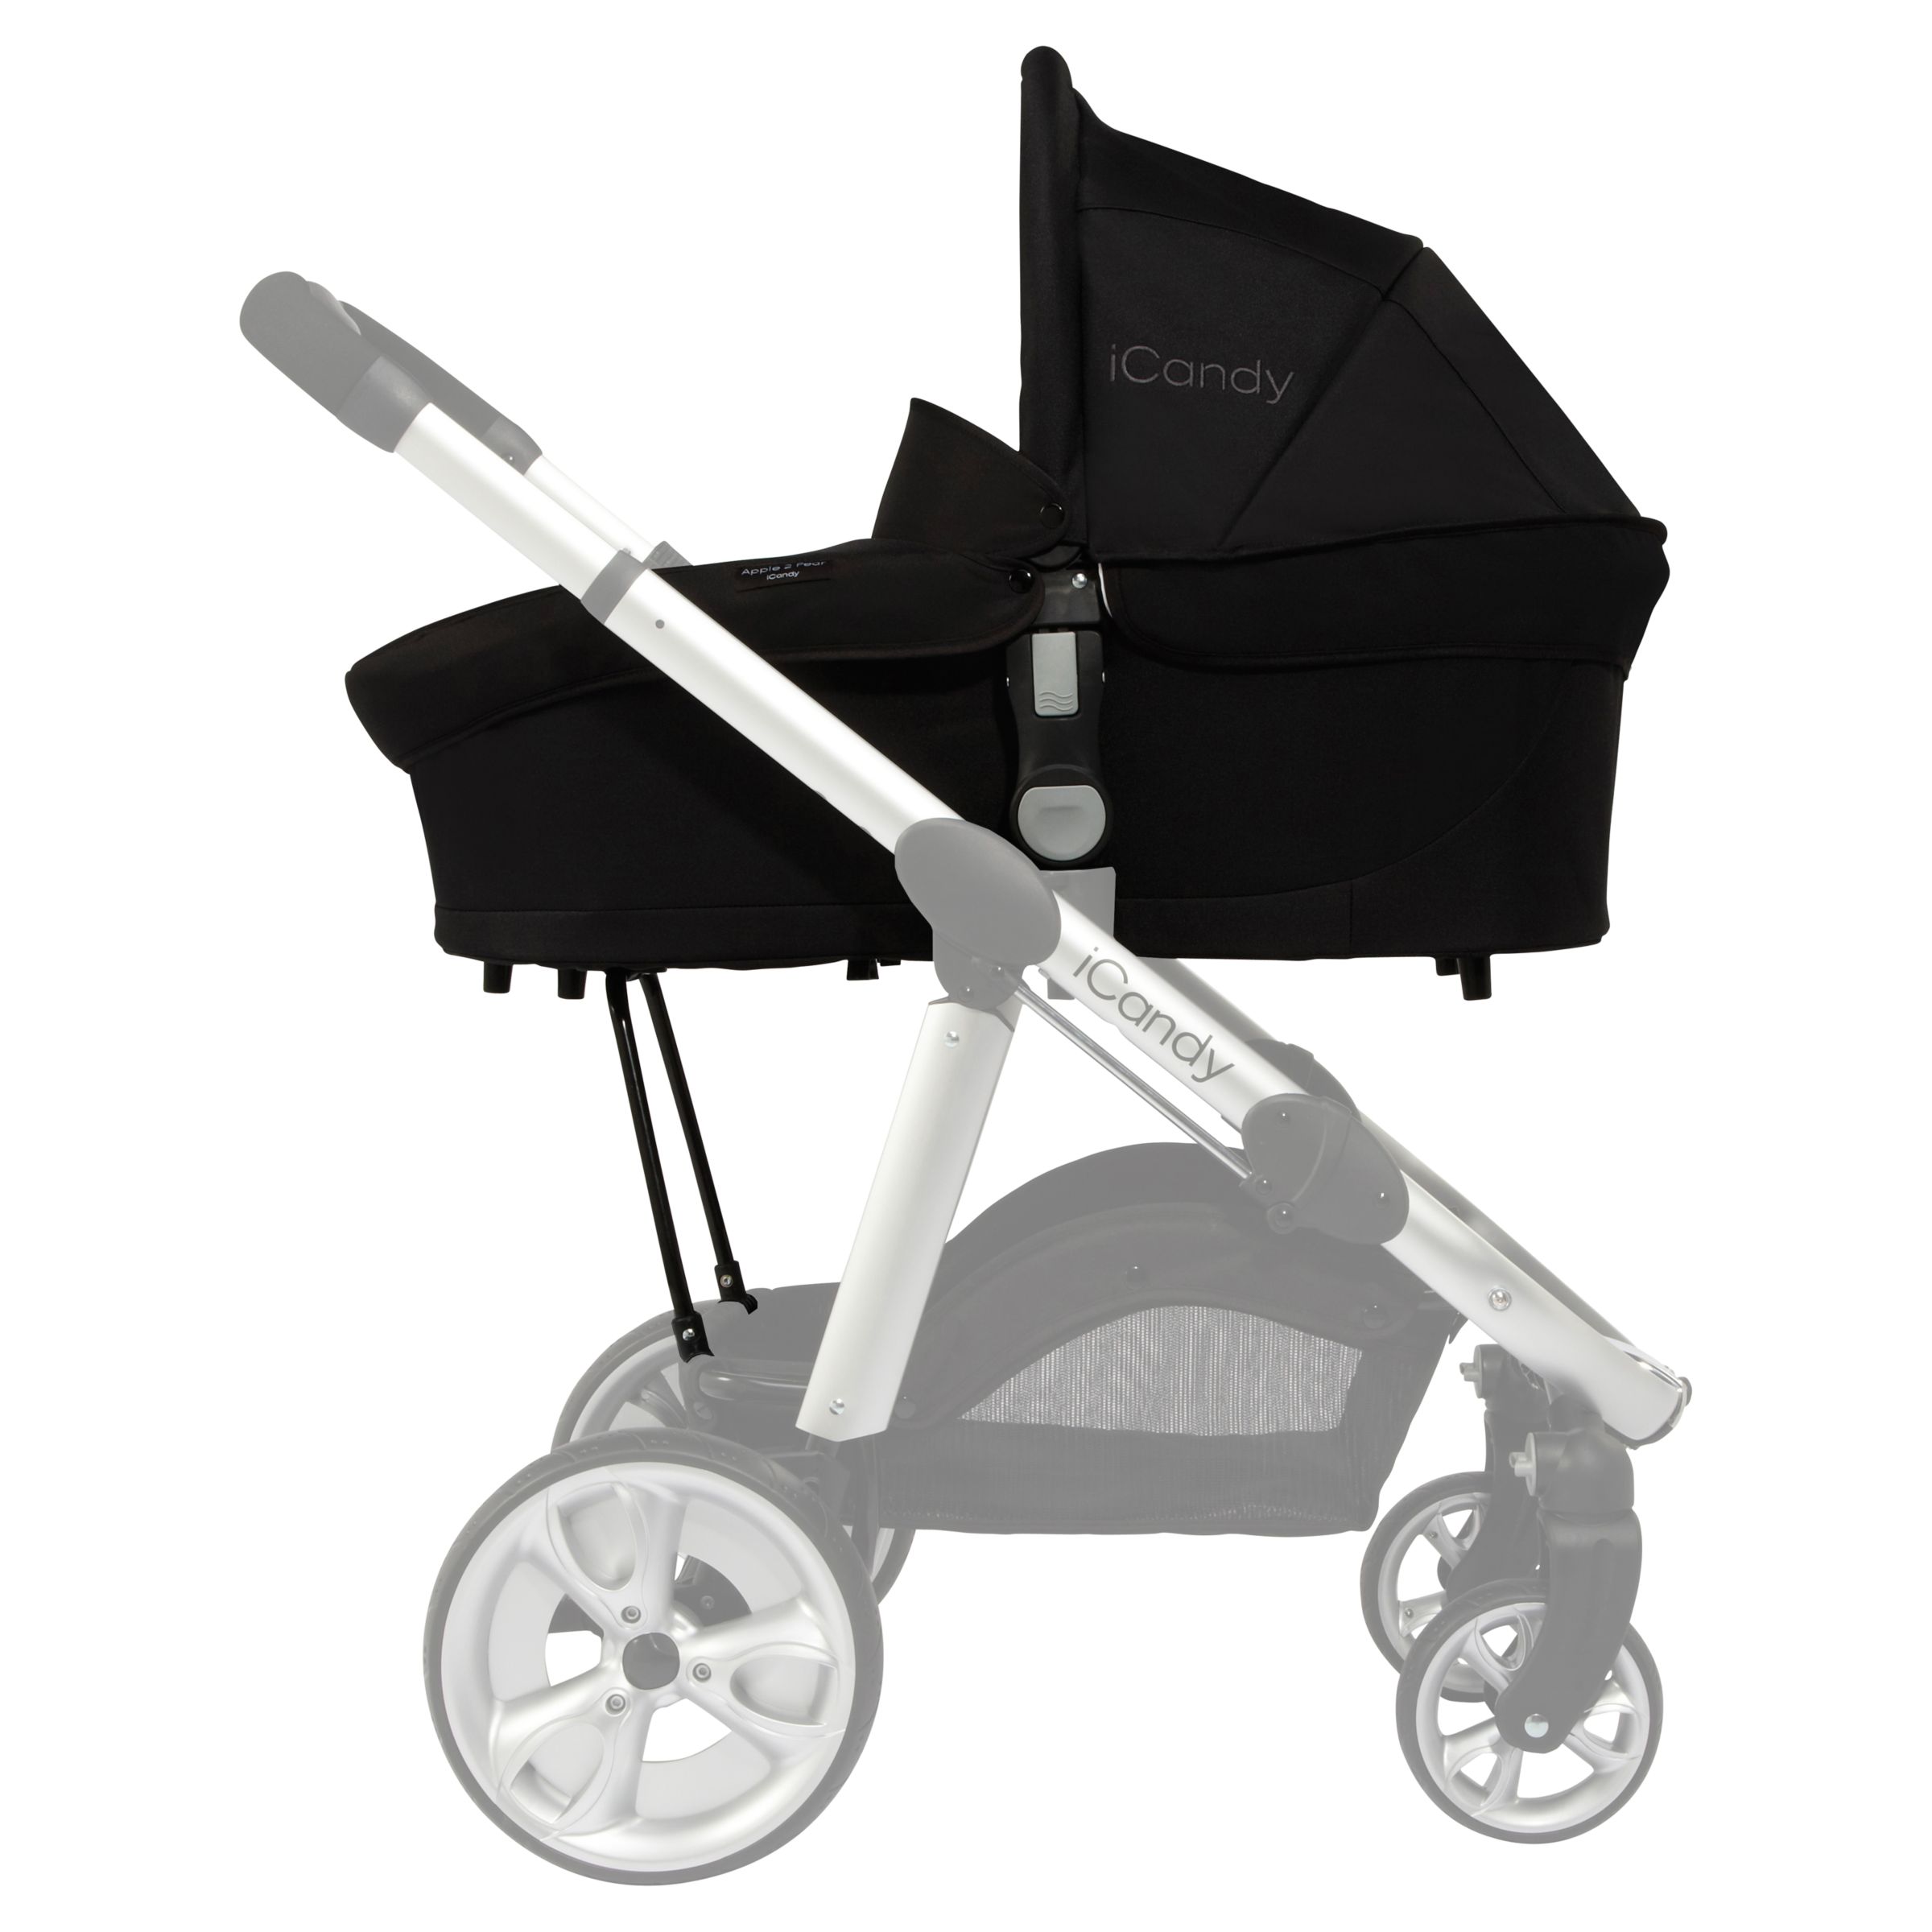 icandy apple carrycot